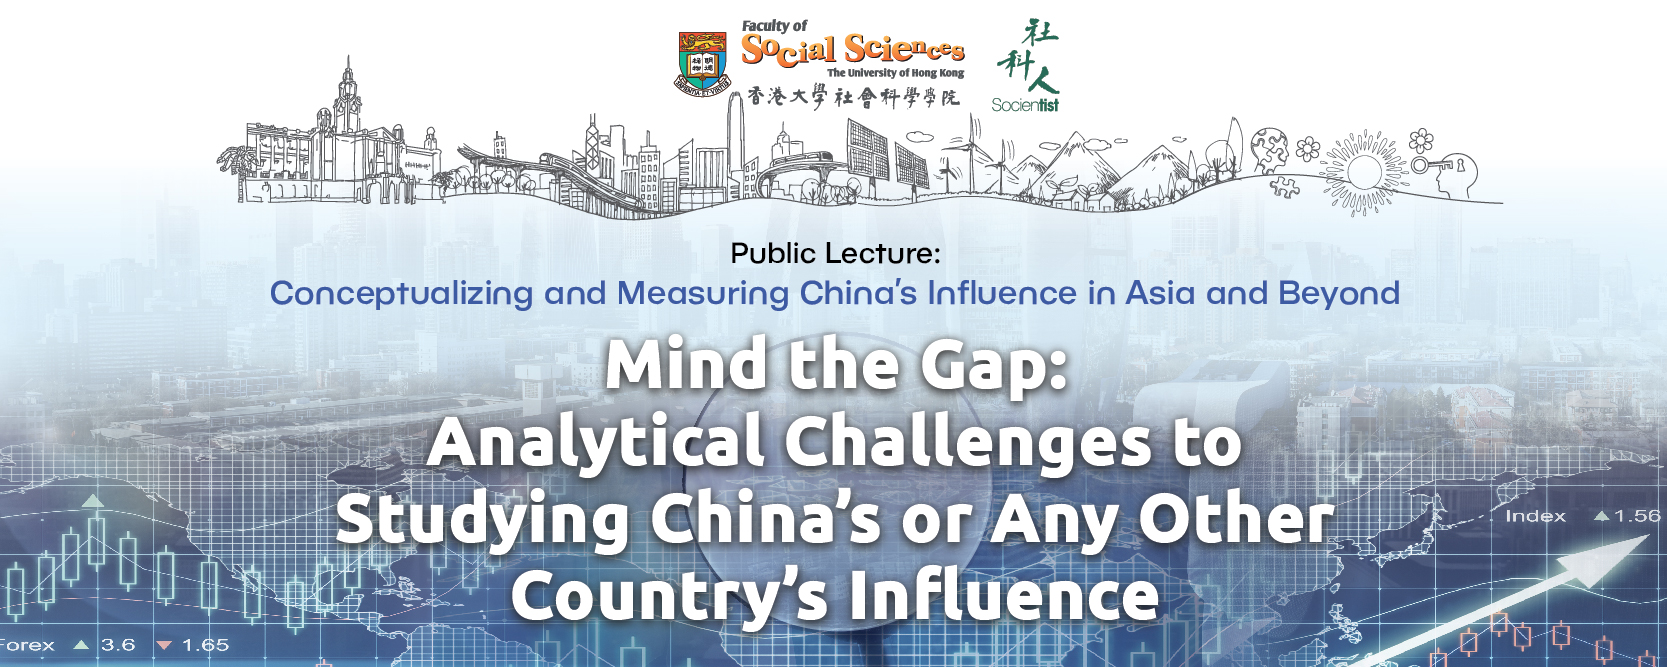 Mind the gap: Analytical challenges to studying China's or any other country's influence